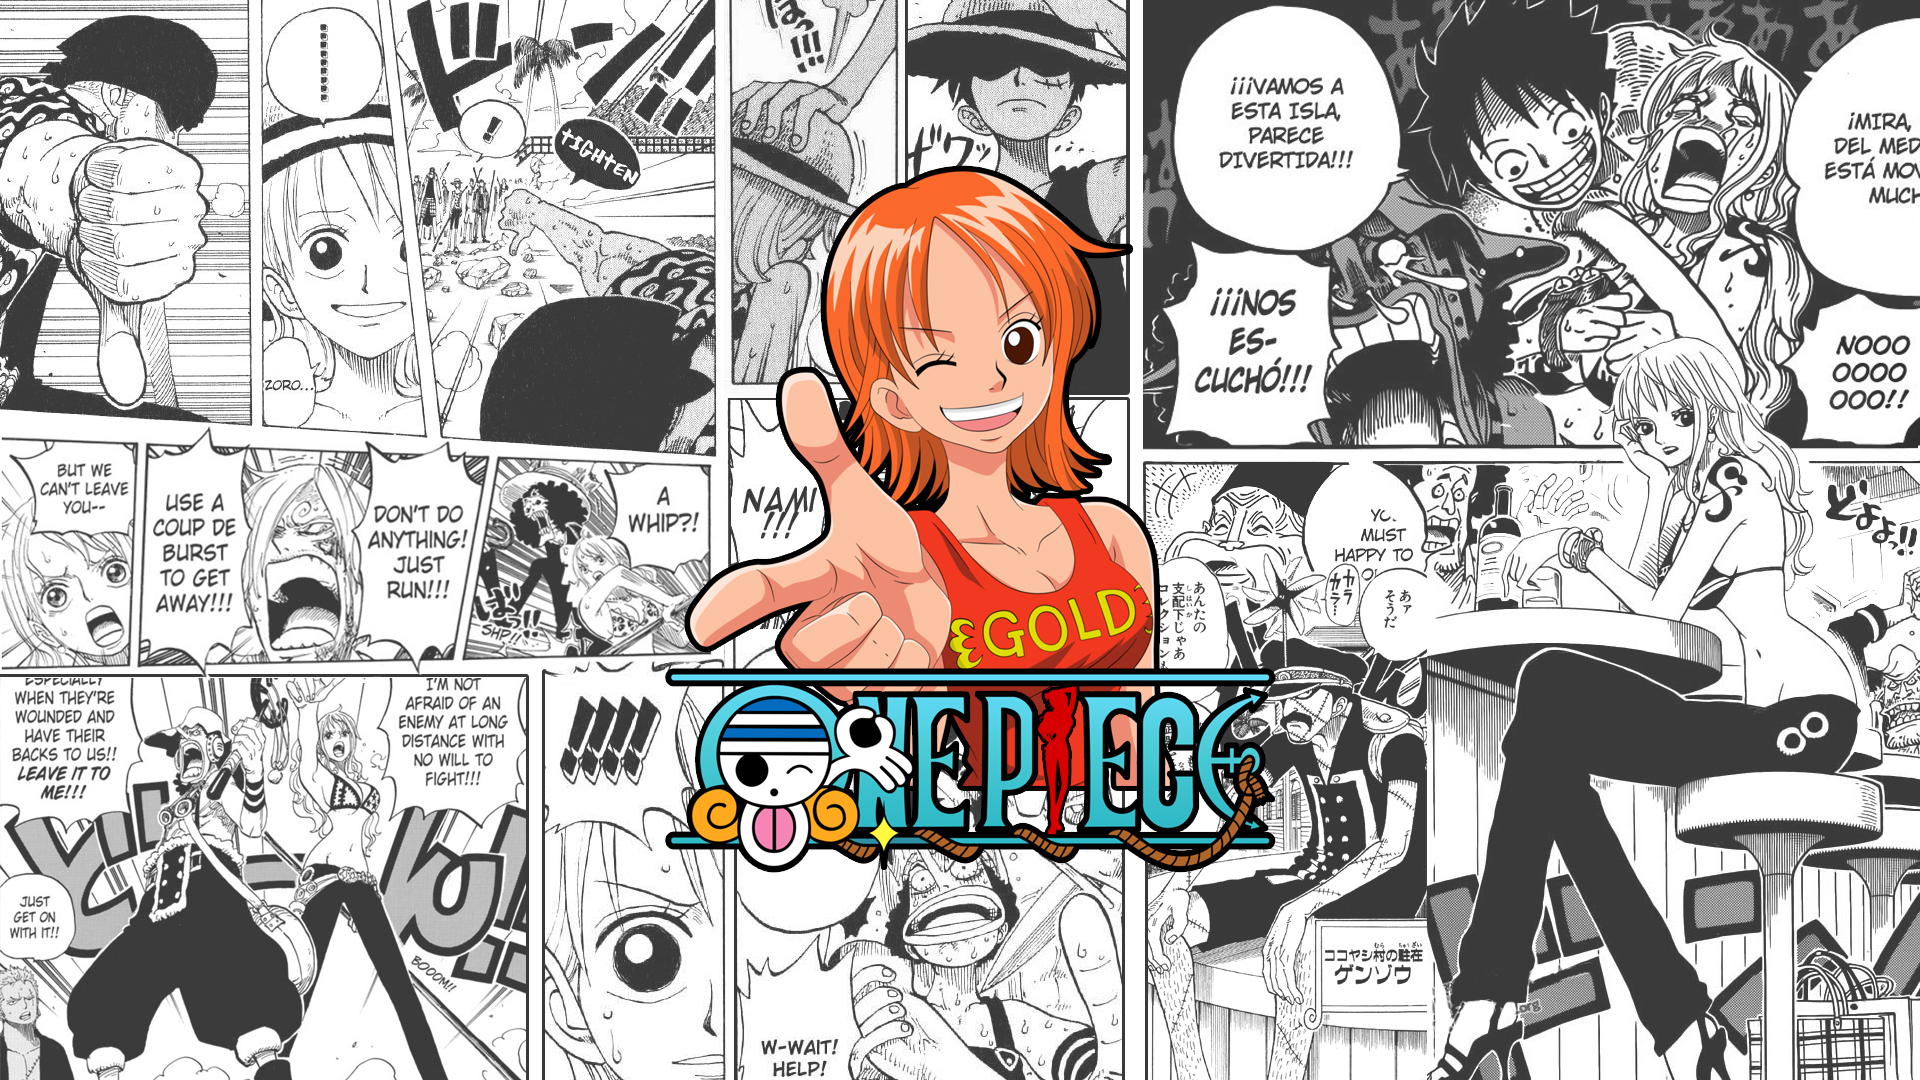 Nami One Piece Wallpapers